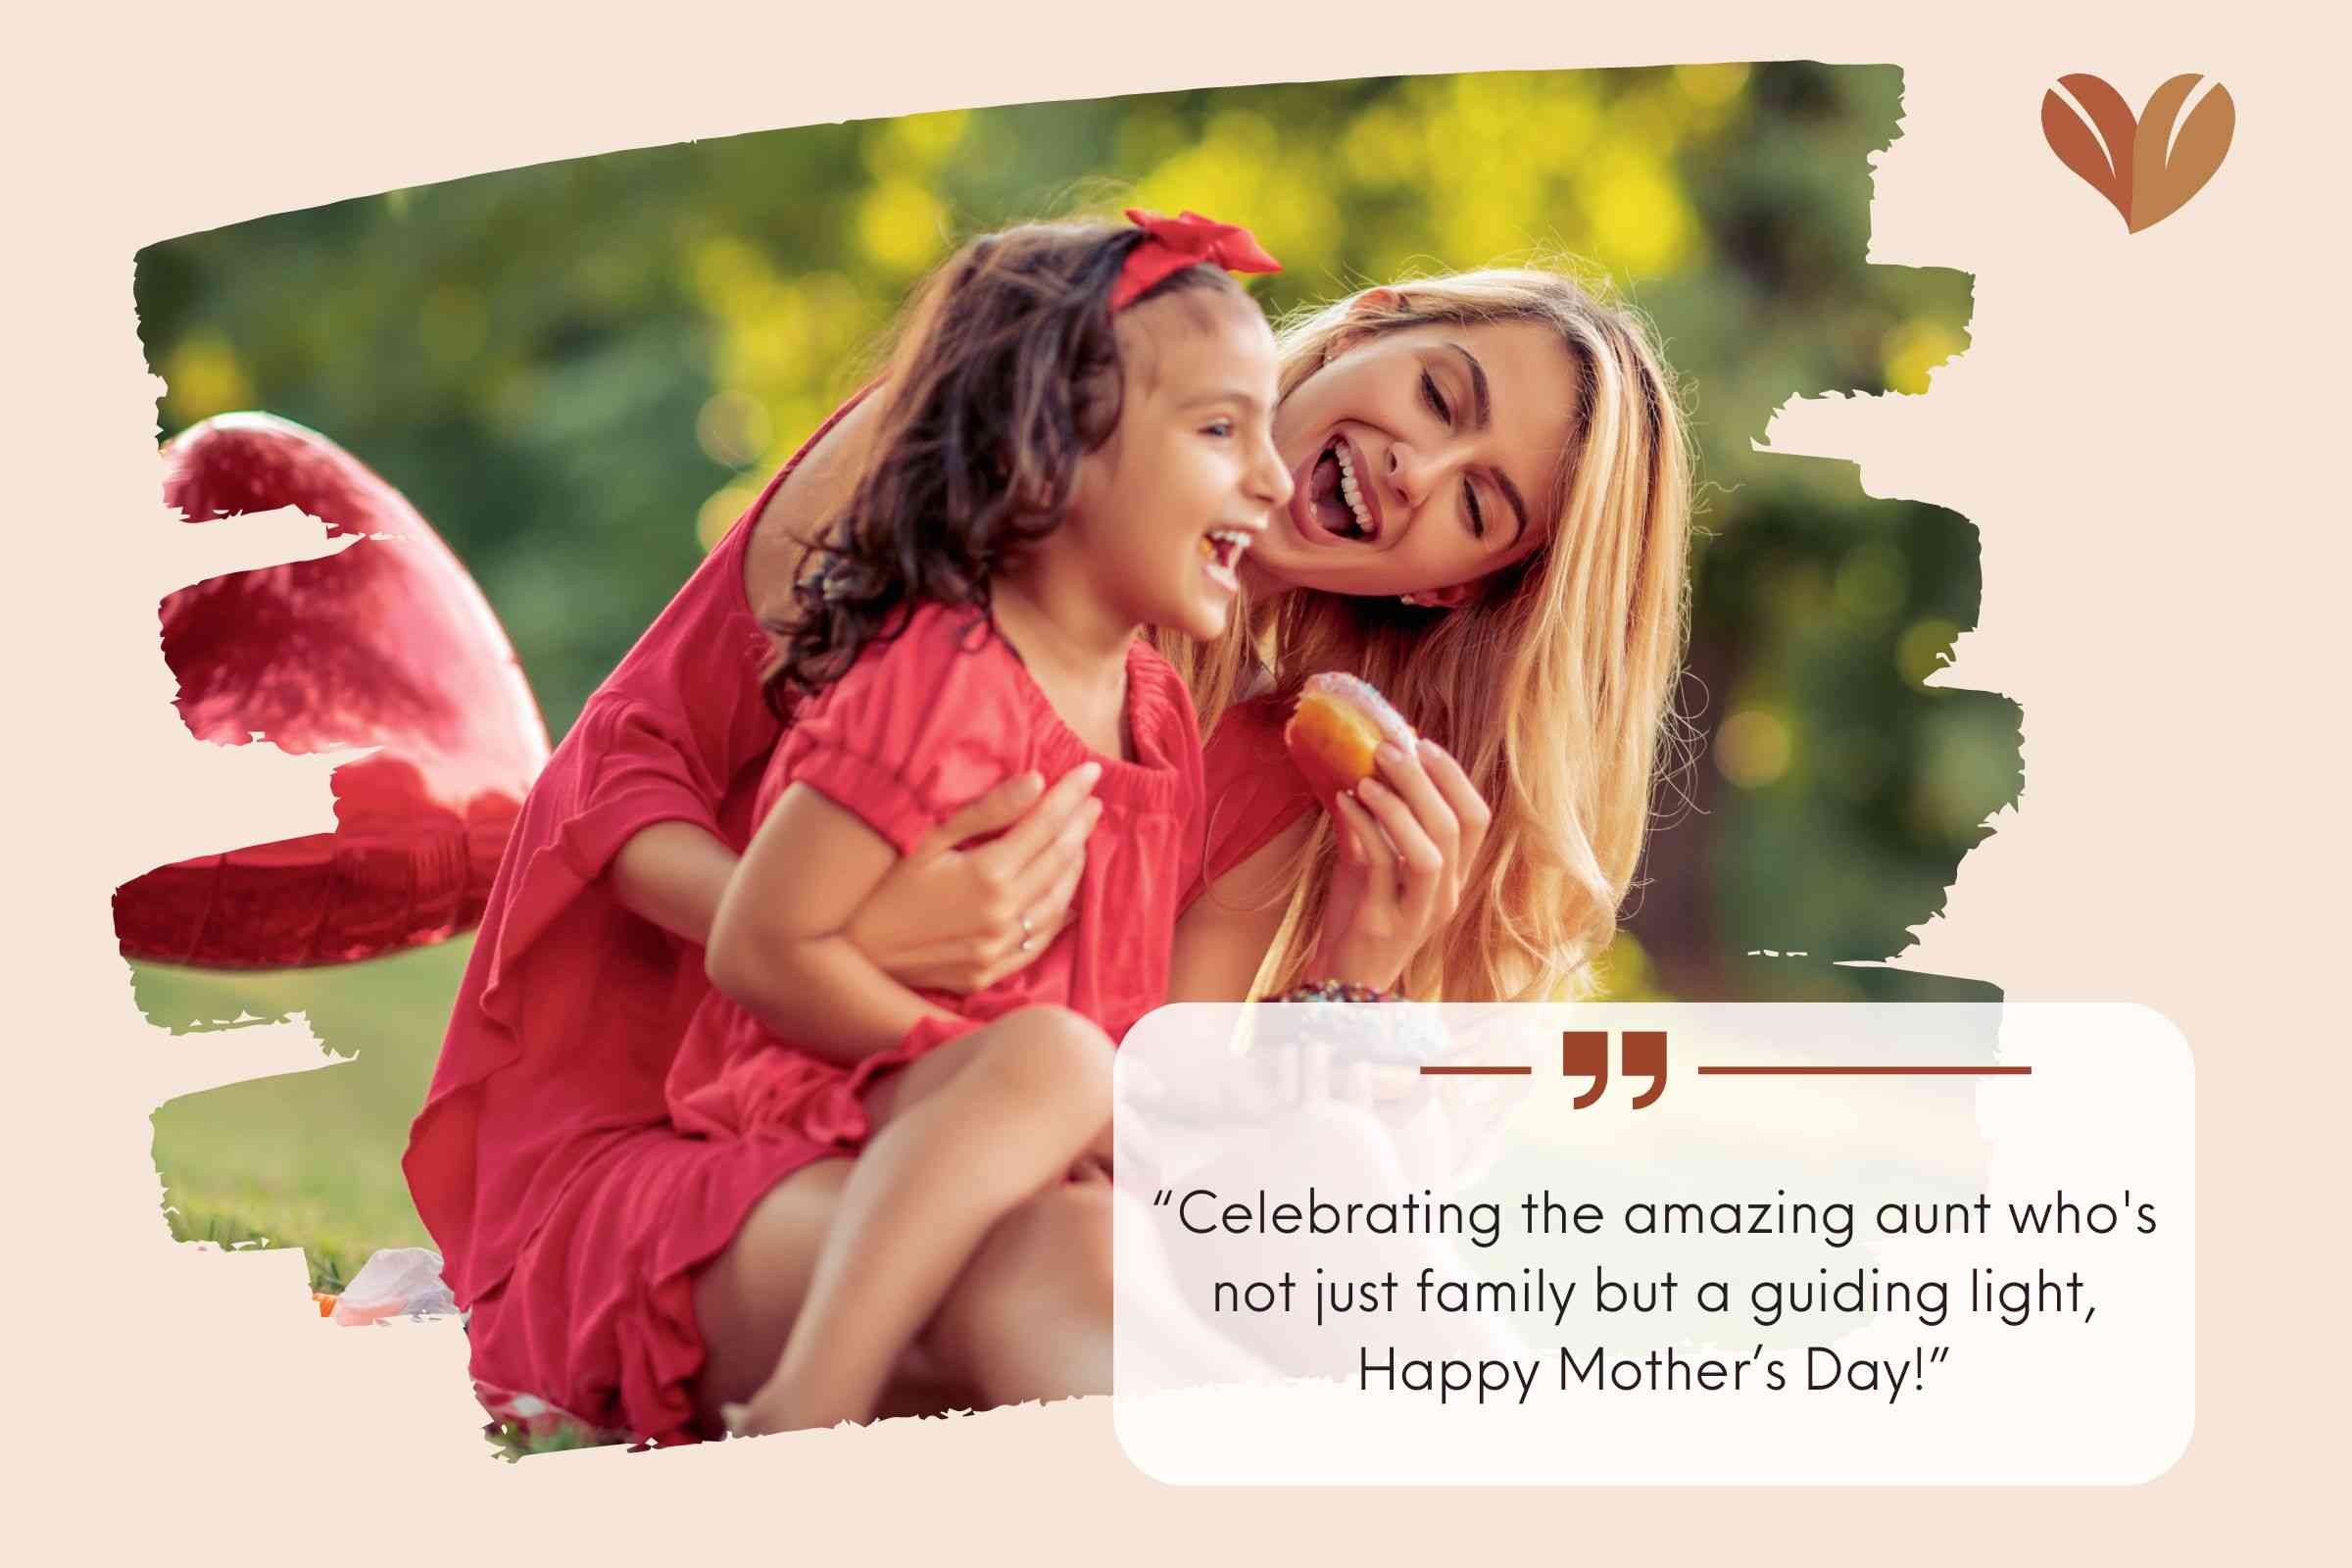 “Celebrating the amazing aunt who's not just family but a guiding light, Happy Mother’s Day!”